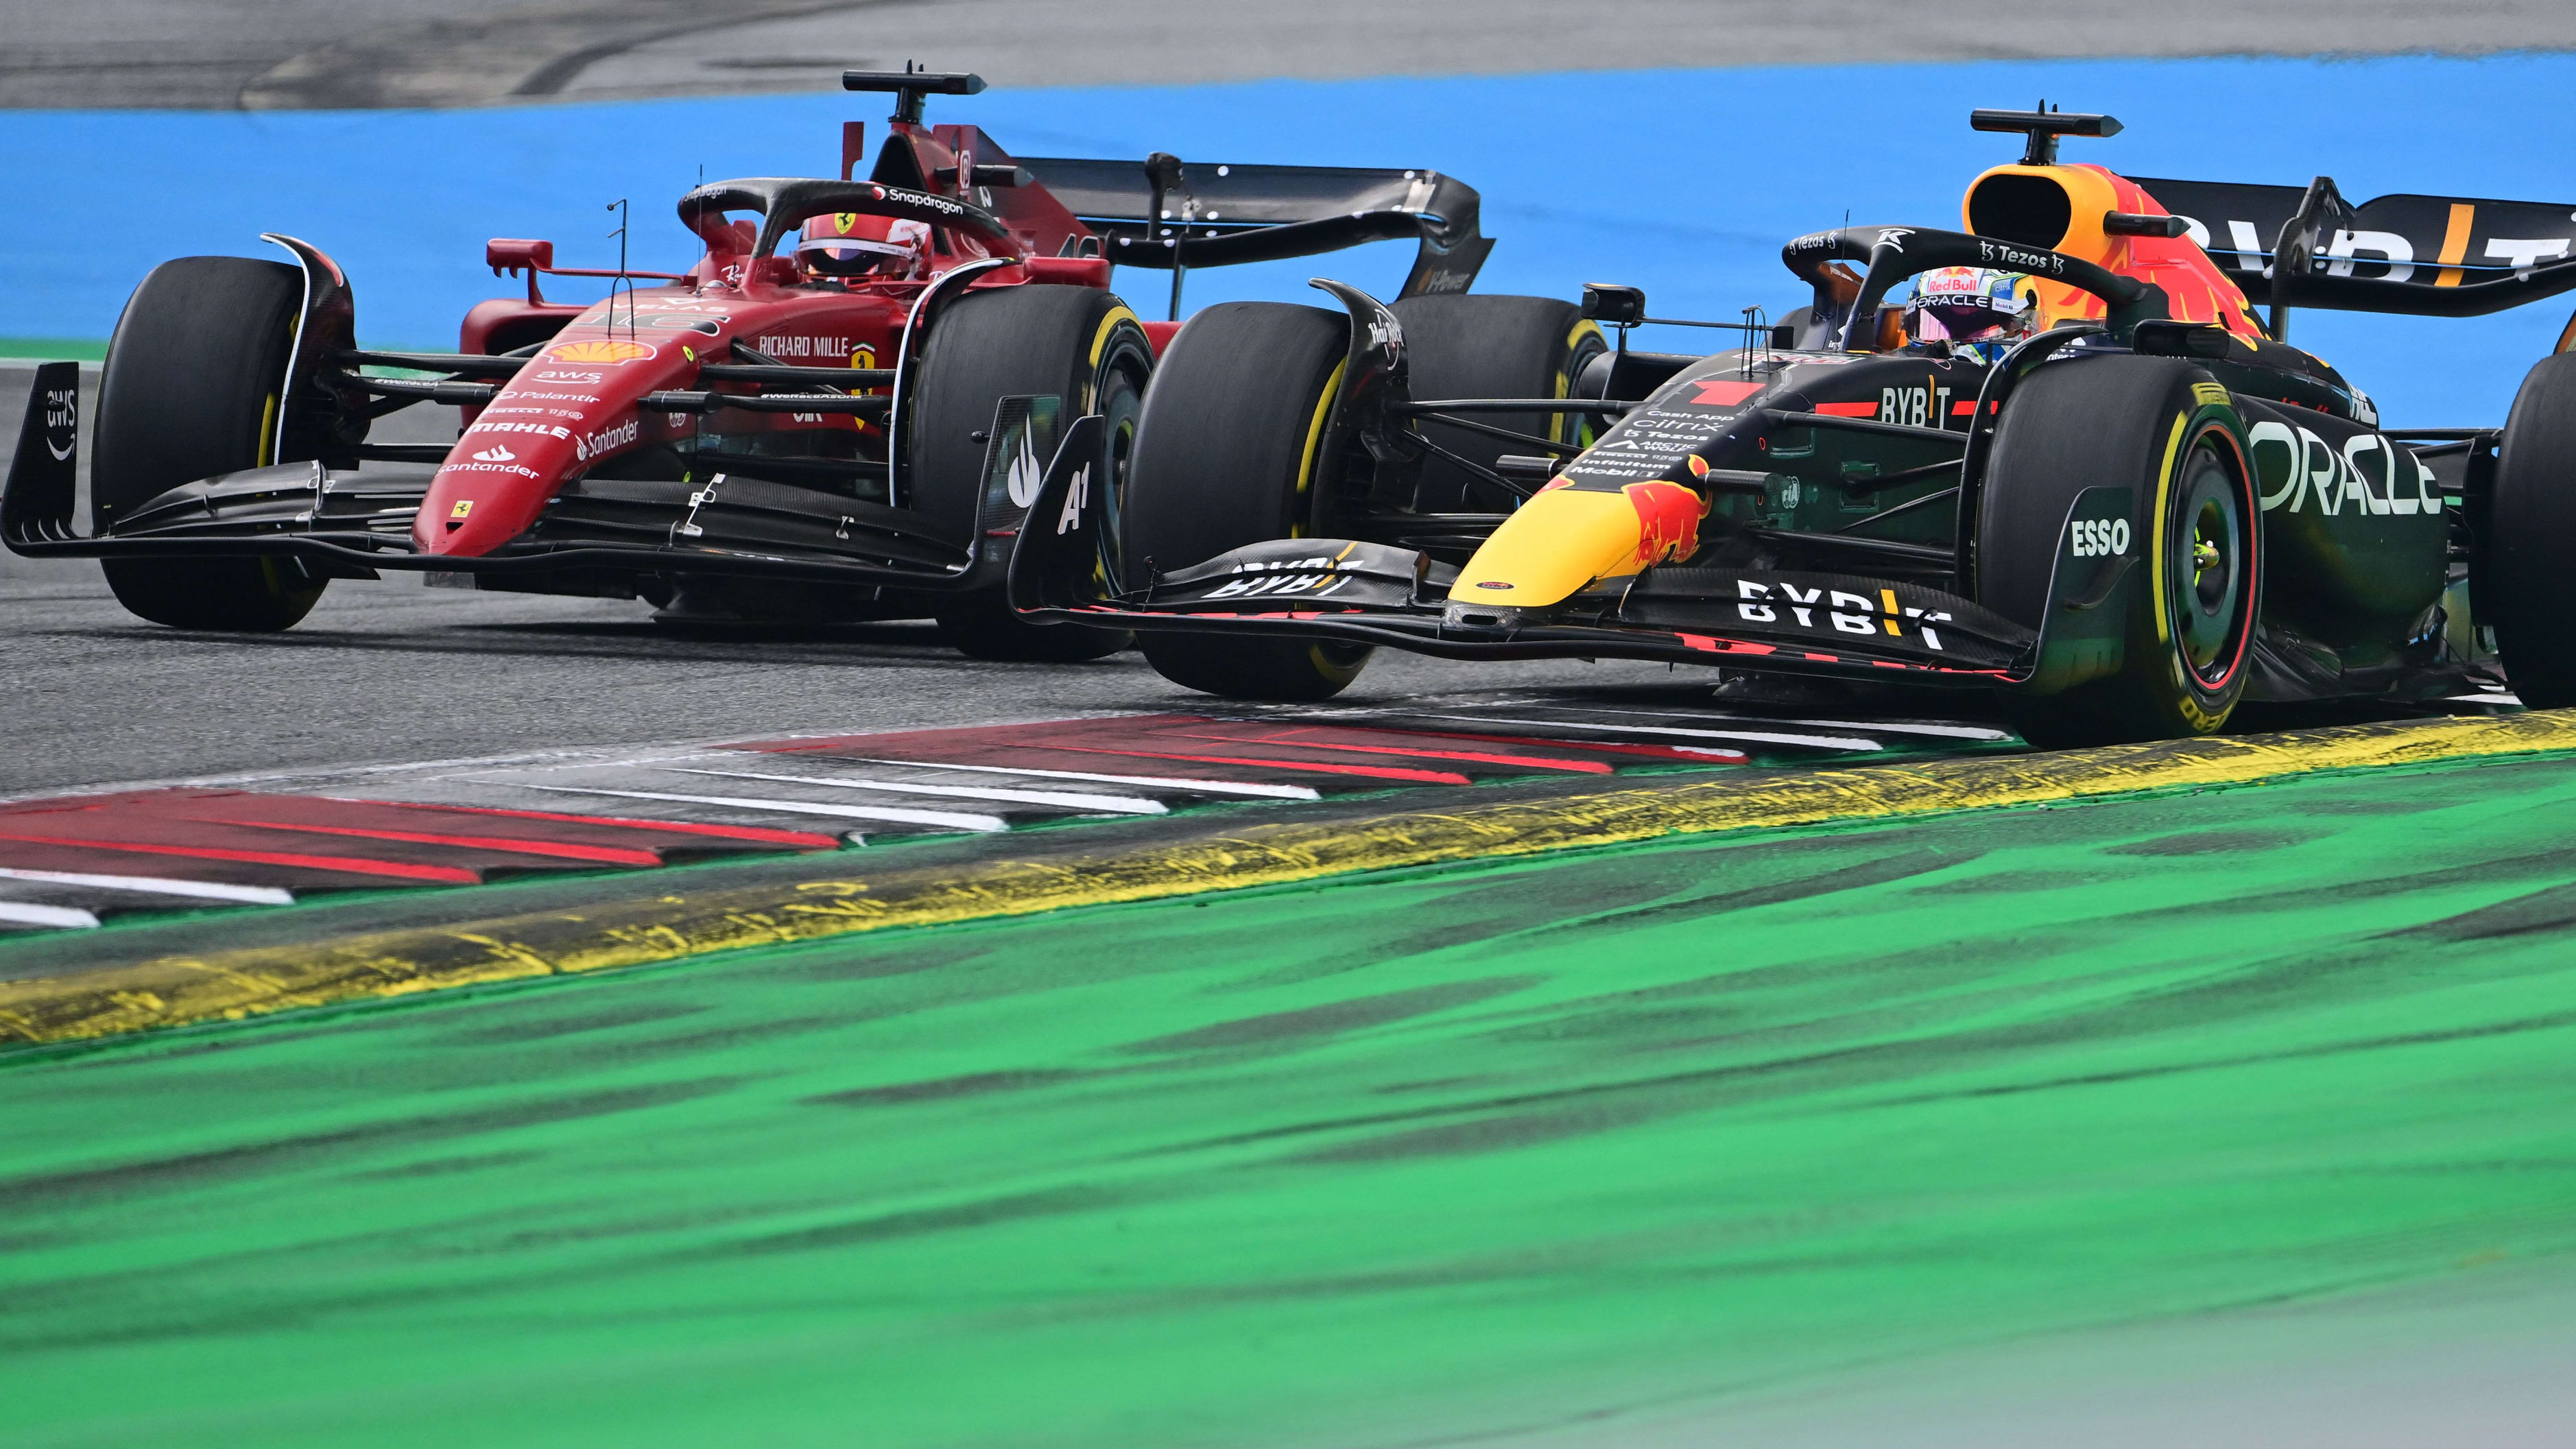 BETTING GUIDE Who are the favourites to shine at the second Sprint weekend of the year in Austria? Formula 1®